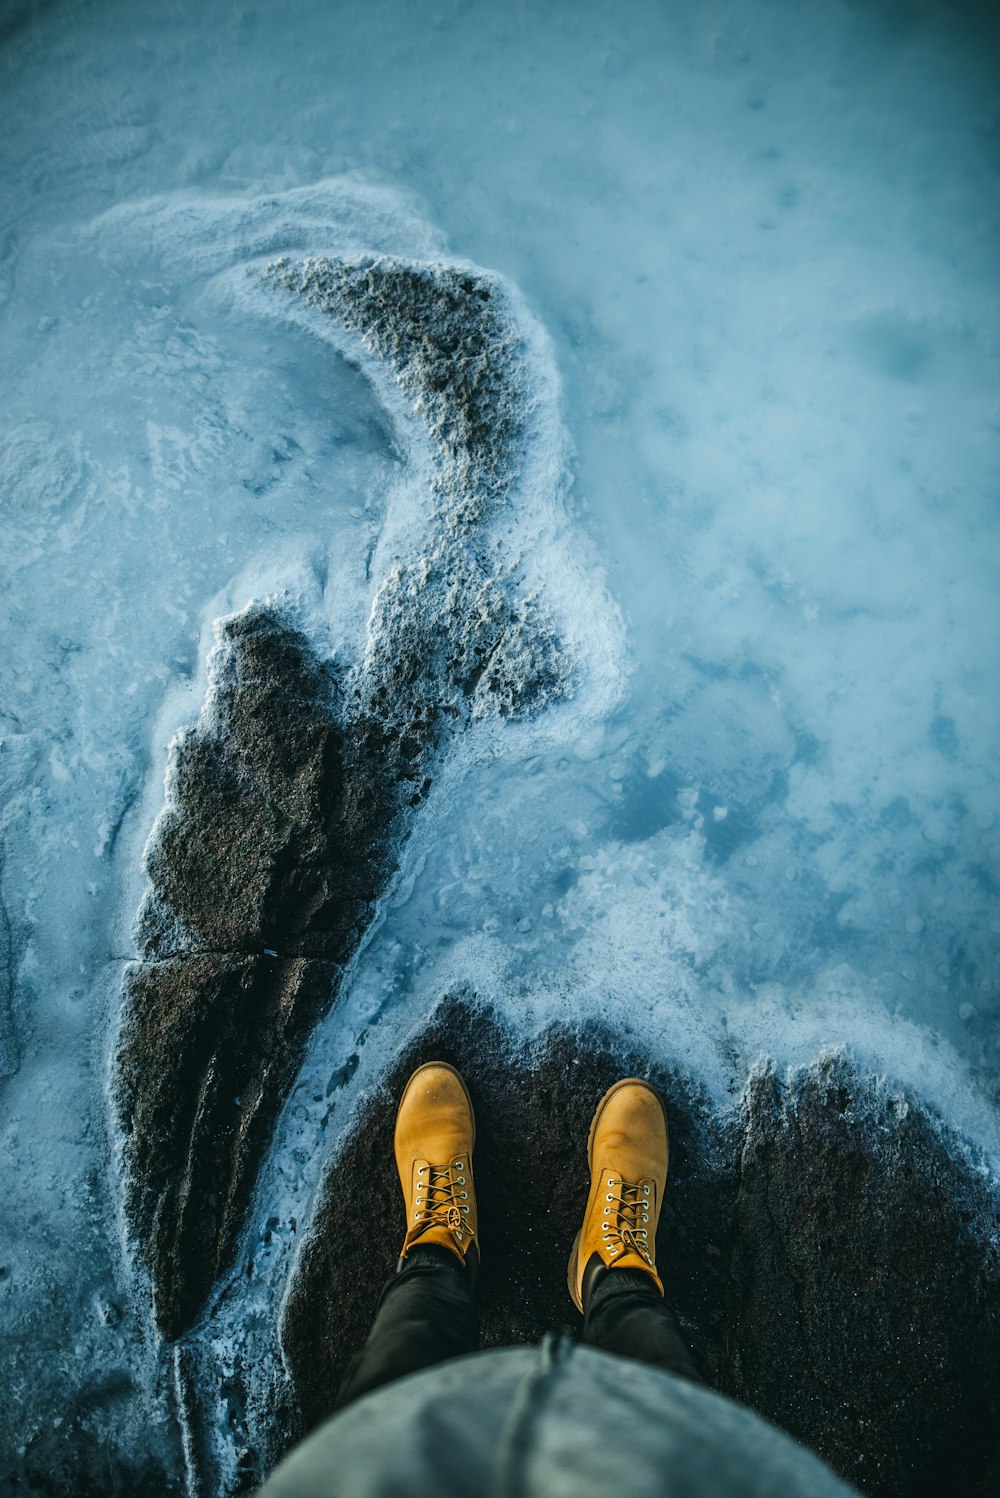 a person wearing yellow shoes standing in the snow